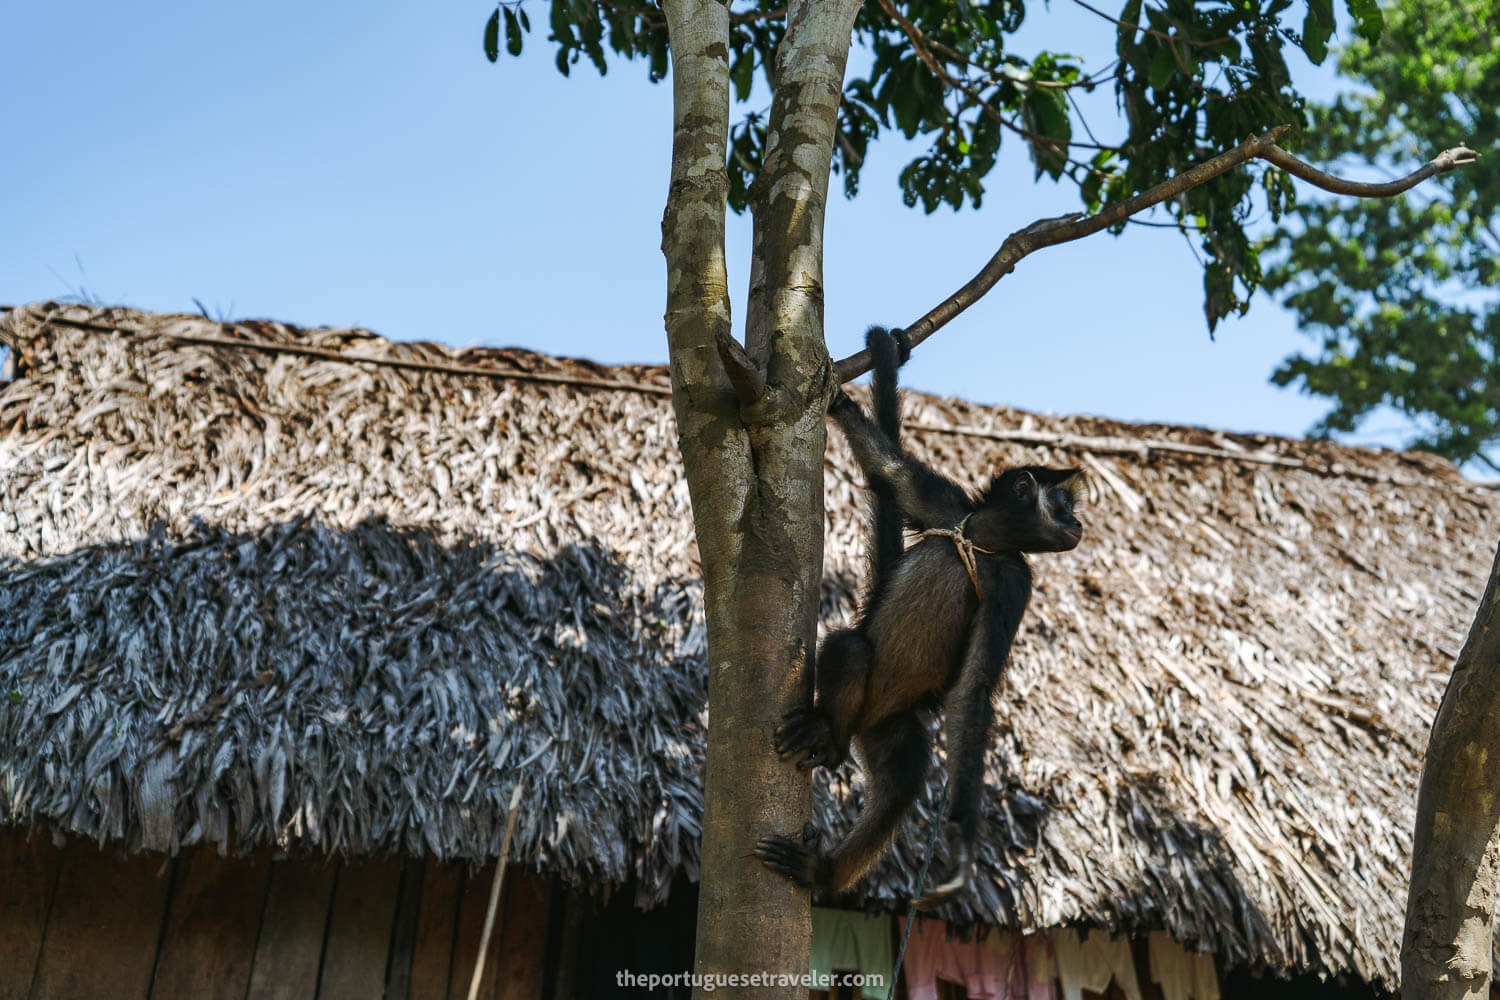 Pancho a spider monkey at the Shuar community, on the Cueva de Los Tayos expedition.